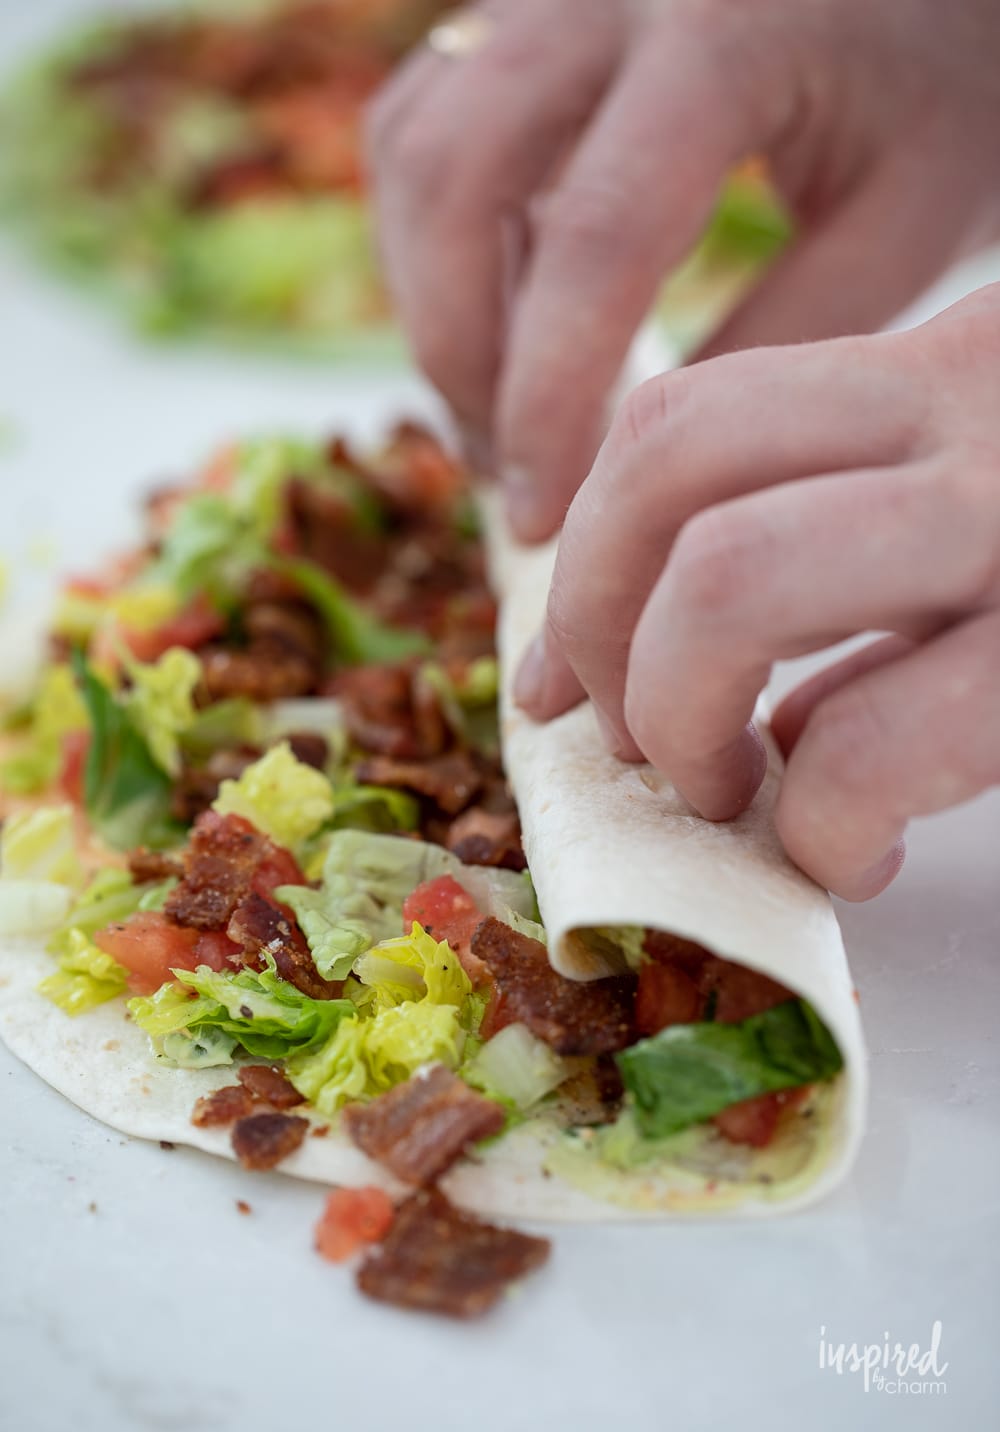 two hands rolling up a flour tortilla to make BLT Pinwheel Sandwiches.